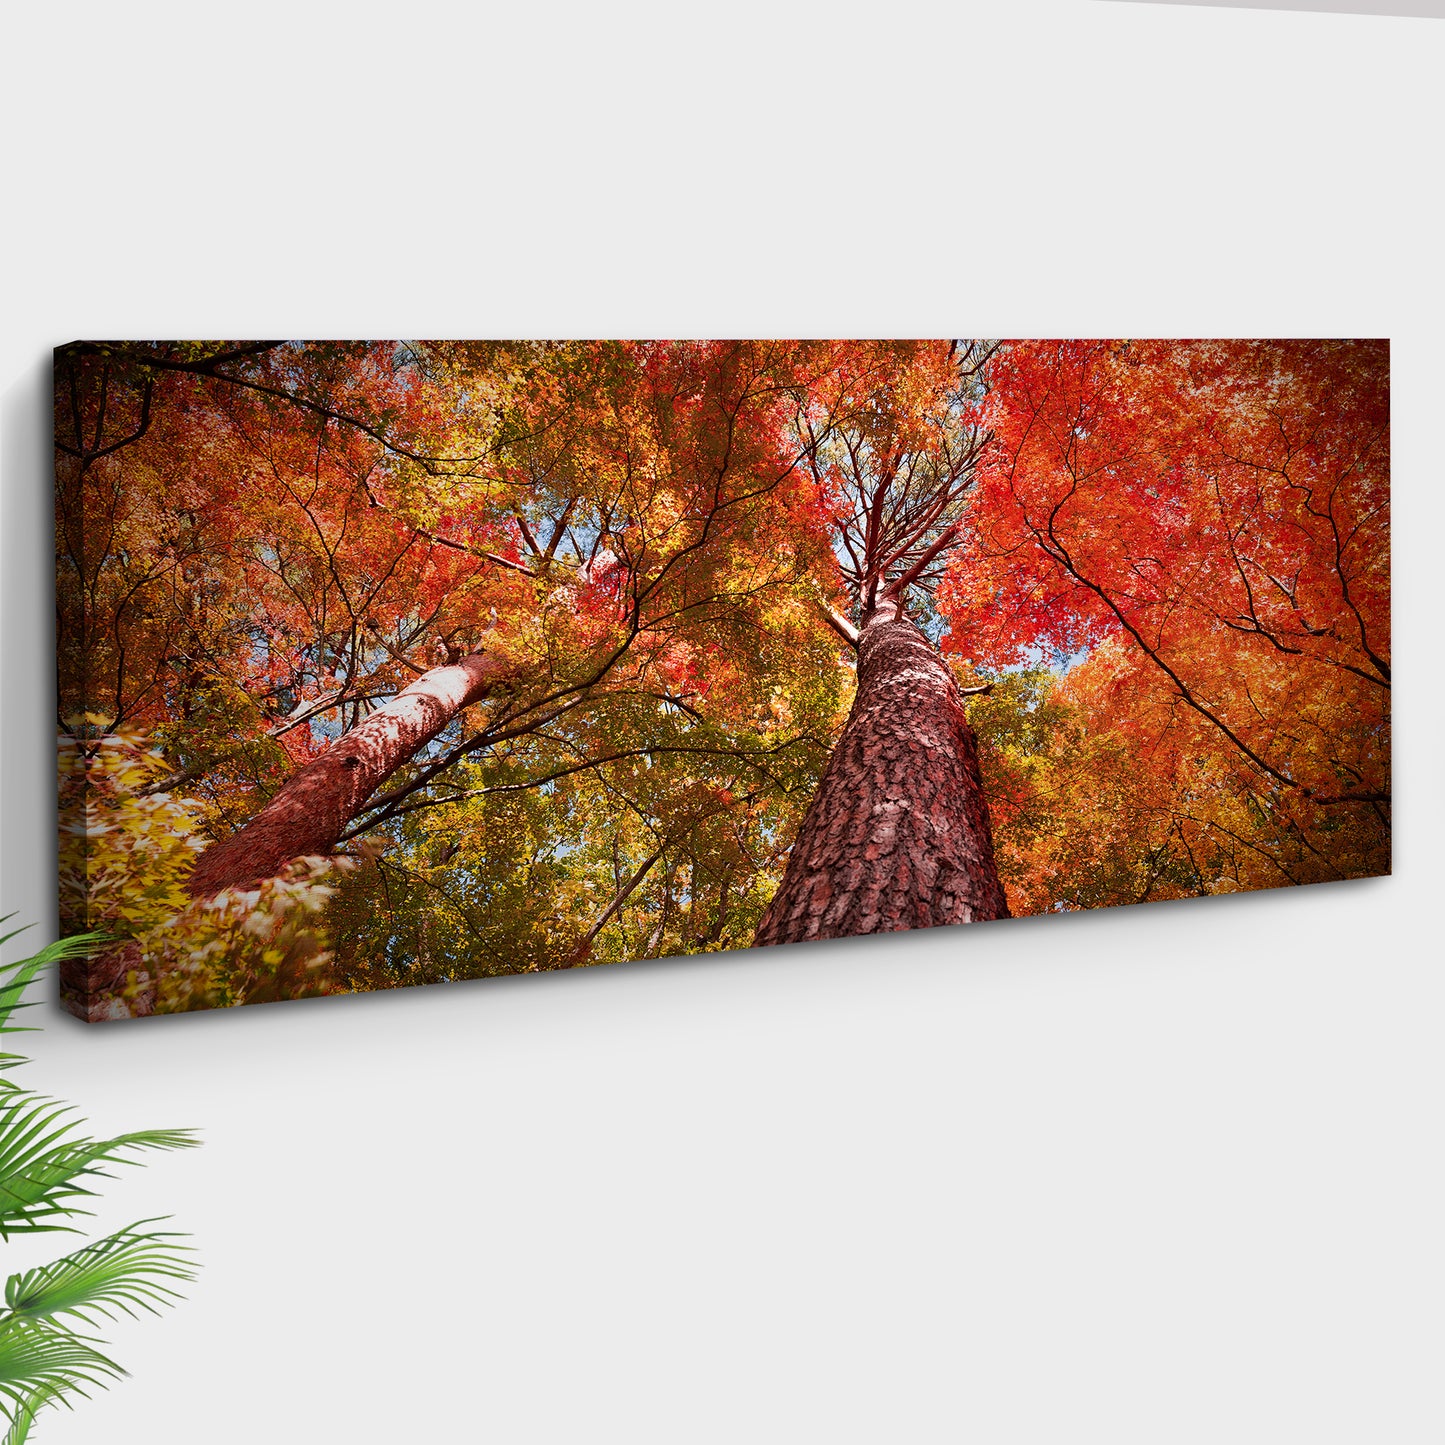 Under The Maple Trees On A Beautiful Morning Canvas Wall Art Style 1 - Image by Tailored Canvases